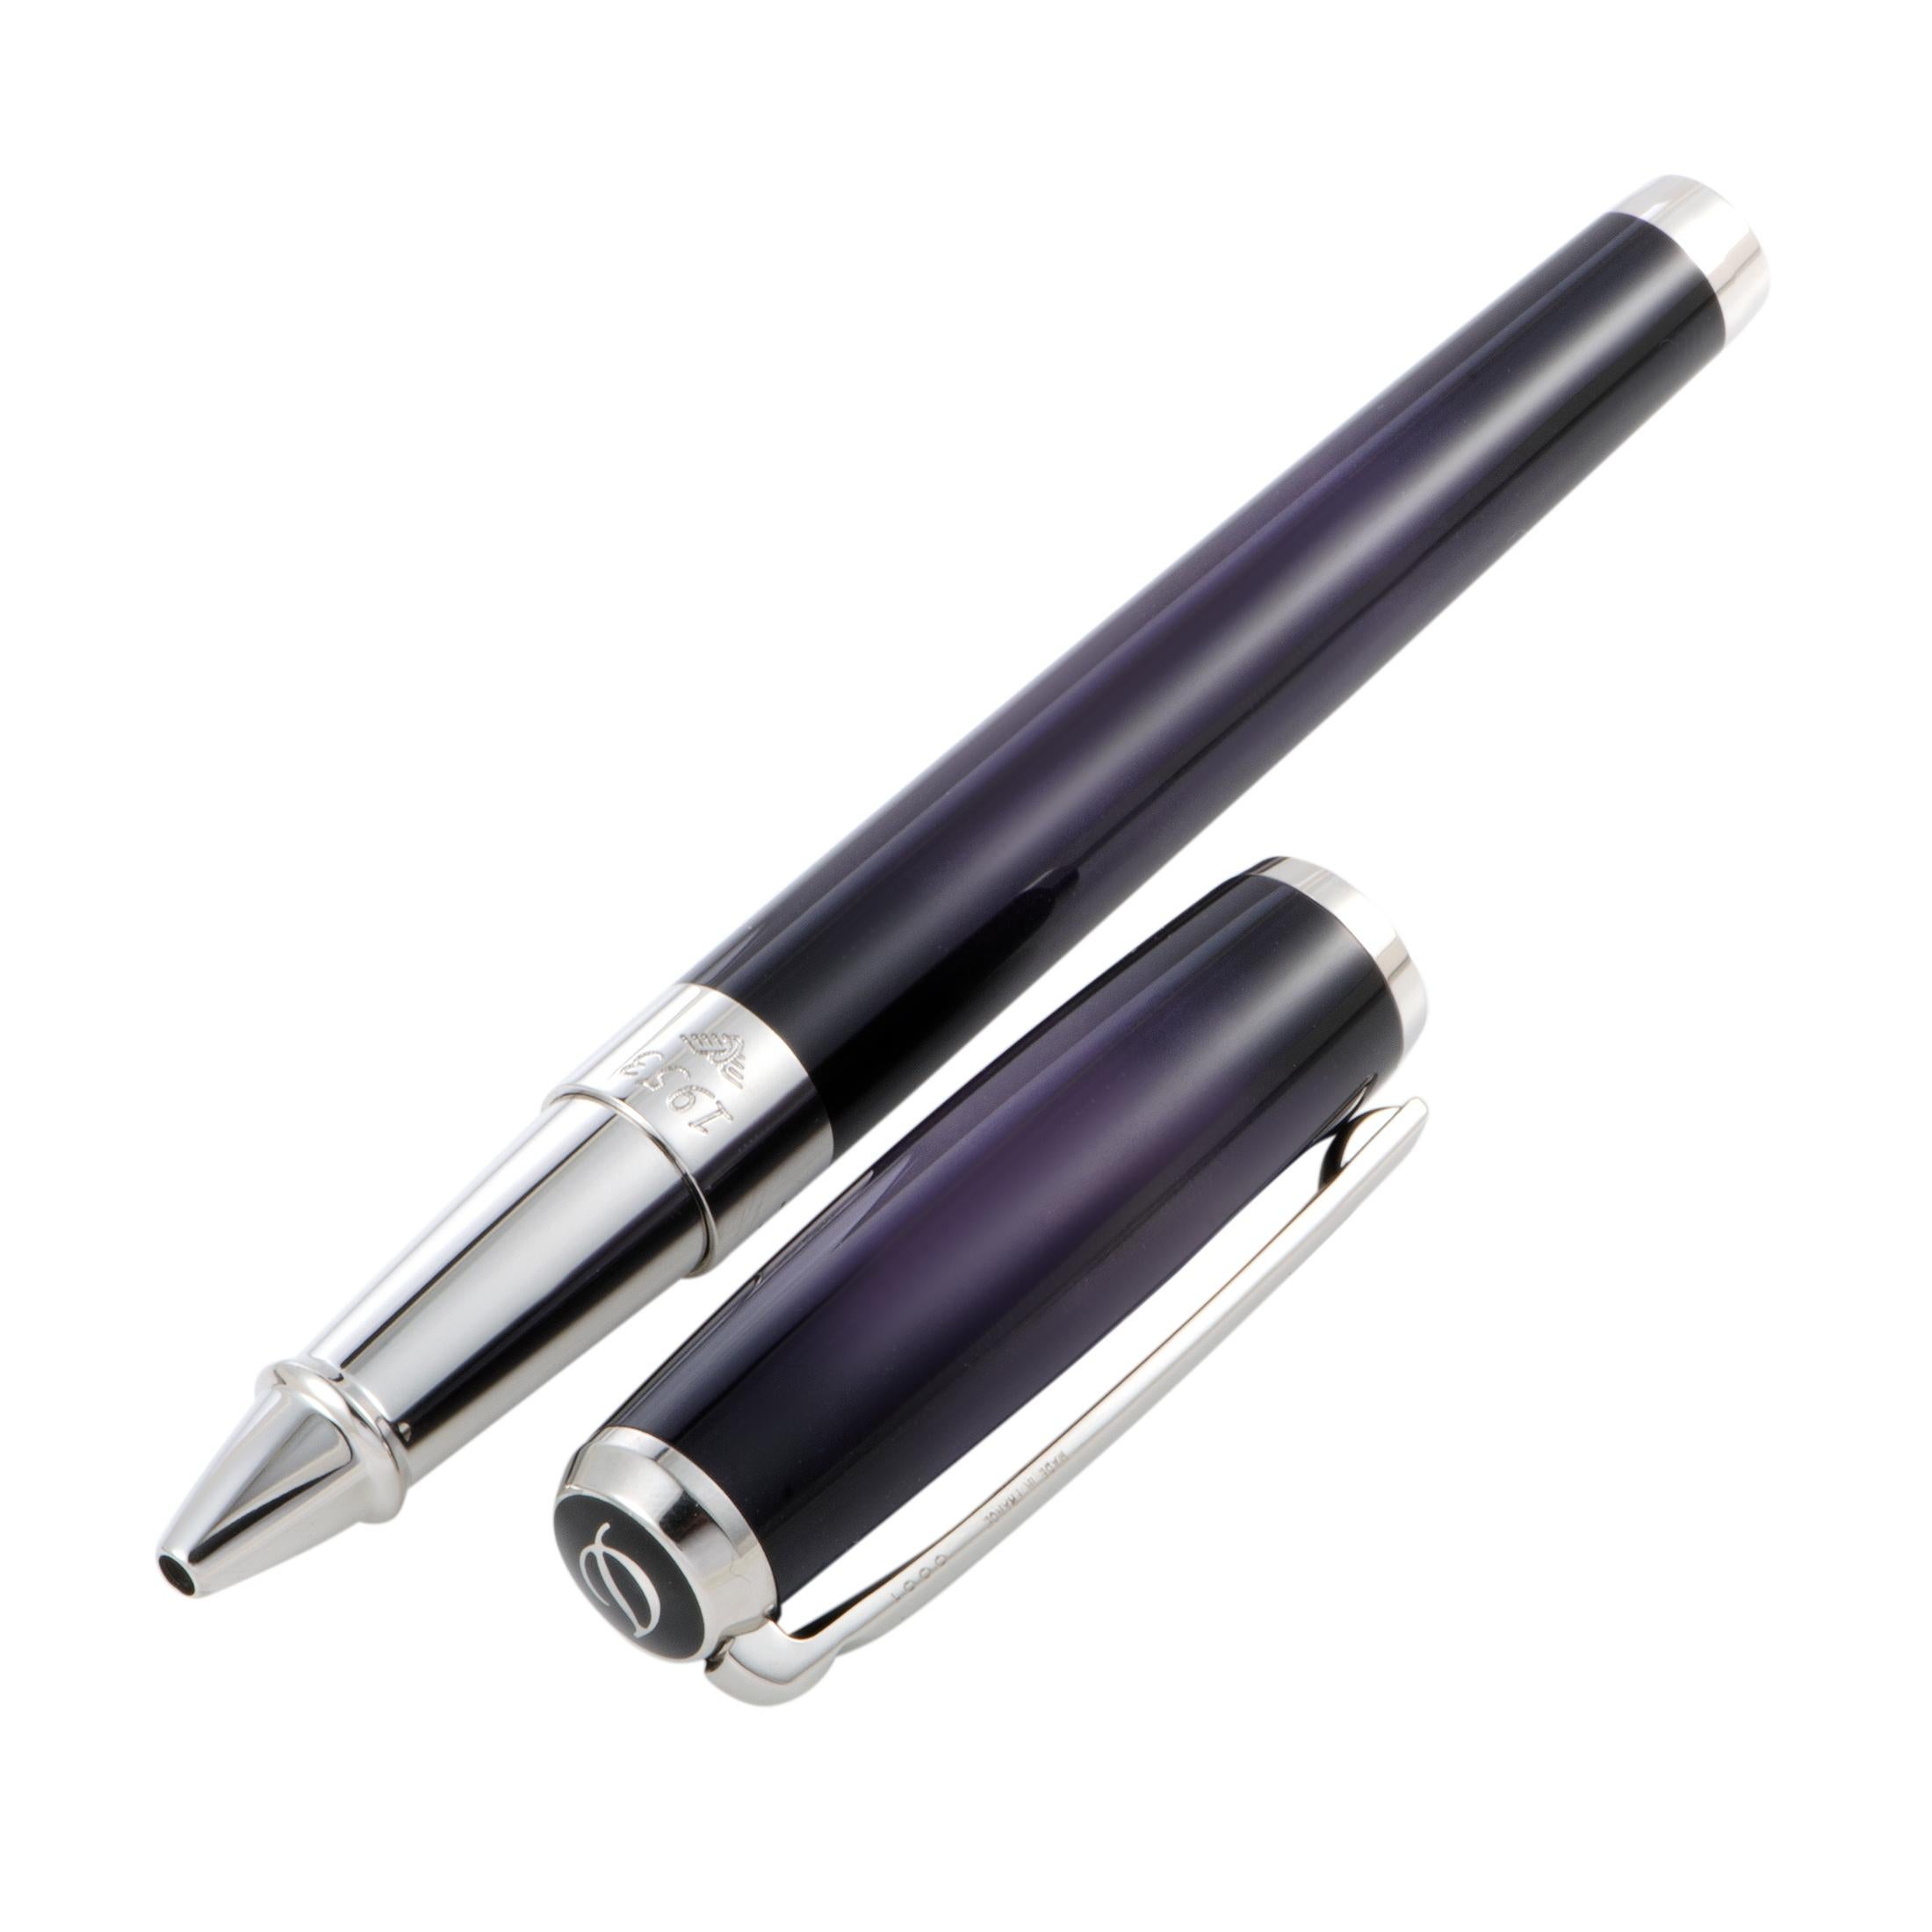 The sleek, elegant design of this exquisite rollerball pen combined with an exceptionally refined blend of purple and black creates a stunning, aesthetically appealing look. The pen is presented by S.T. Dupont within the classy “Line D”